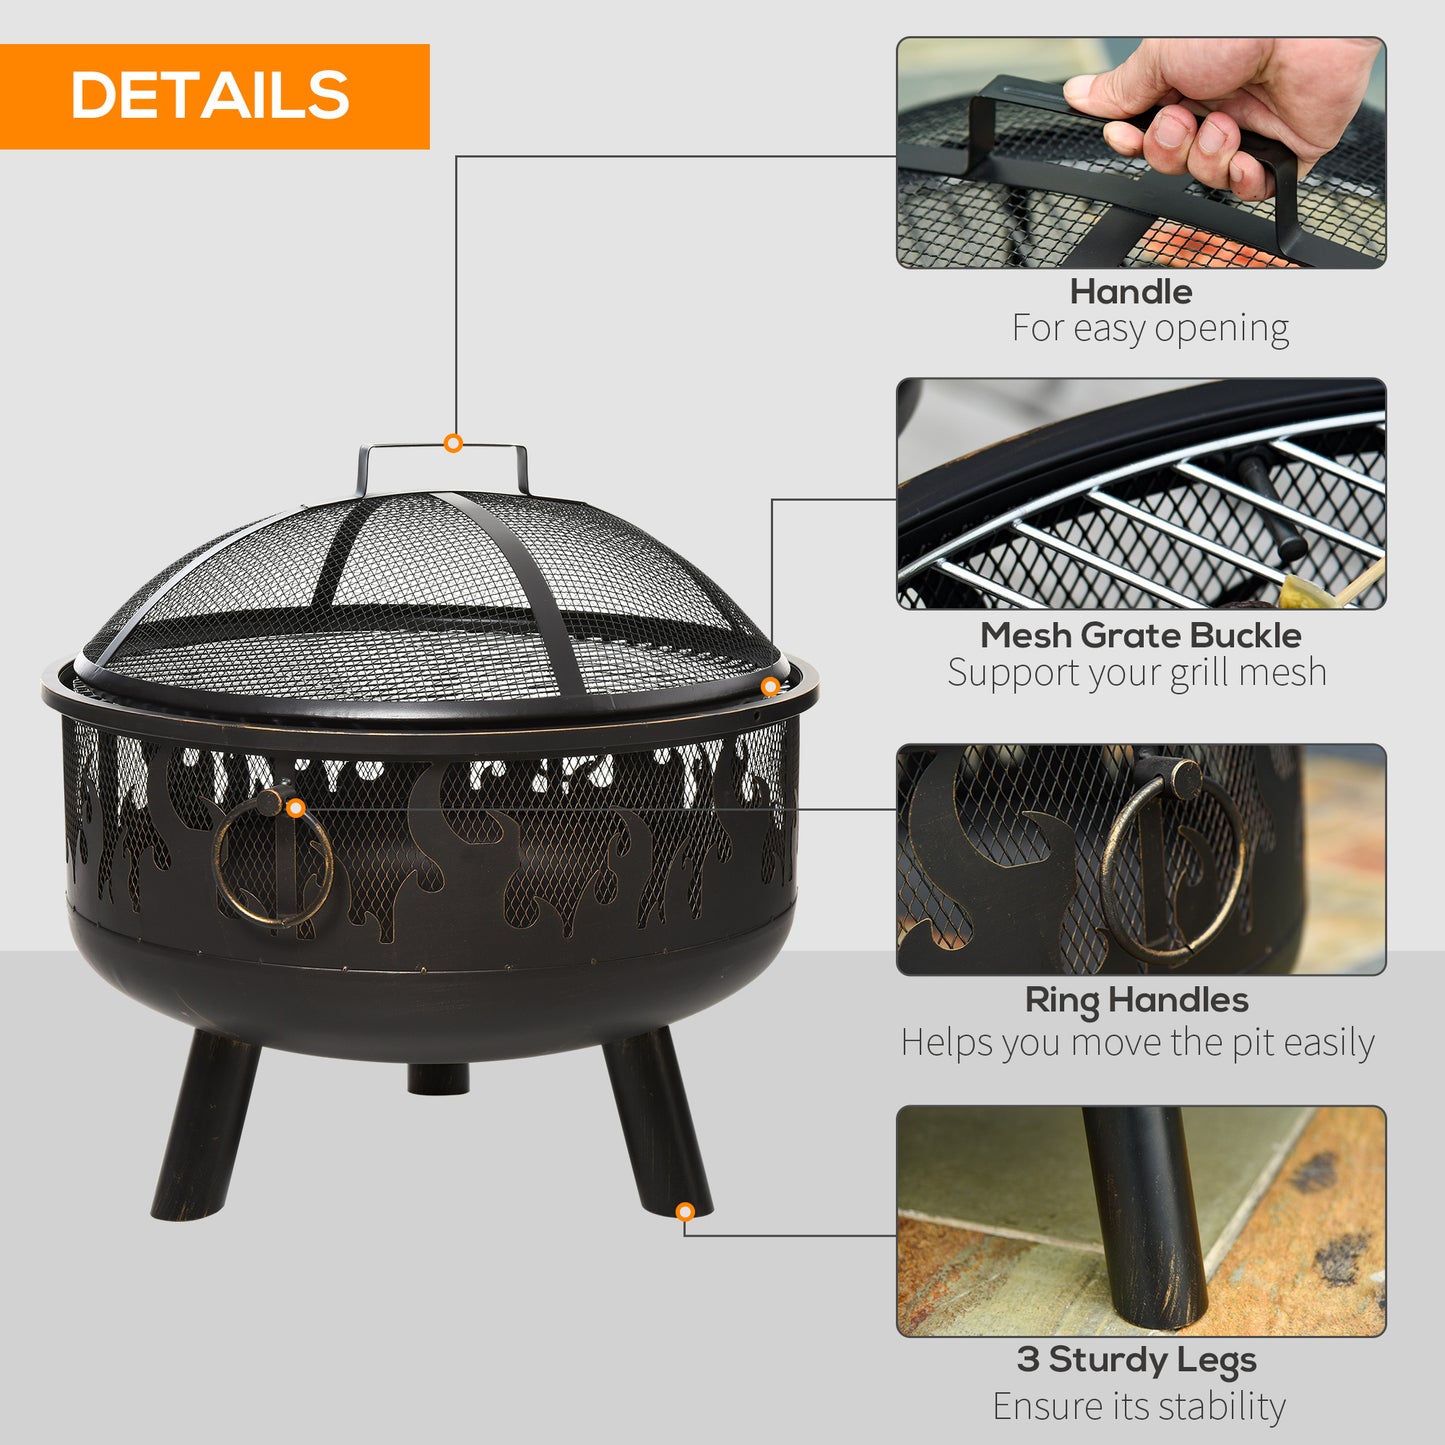 Outsunny 2-in-1 Outdoor Fire Pit with Cooking Grate Steel BBQ Grill Bowl Heater with Spark Screen Cover, Fire Poker for Backyard Bonfire Patio